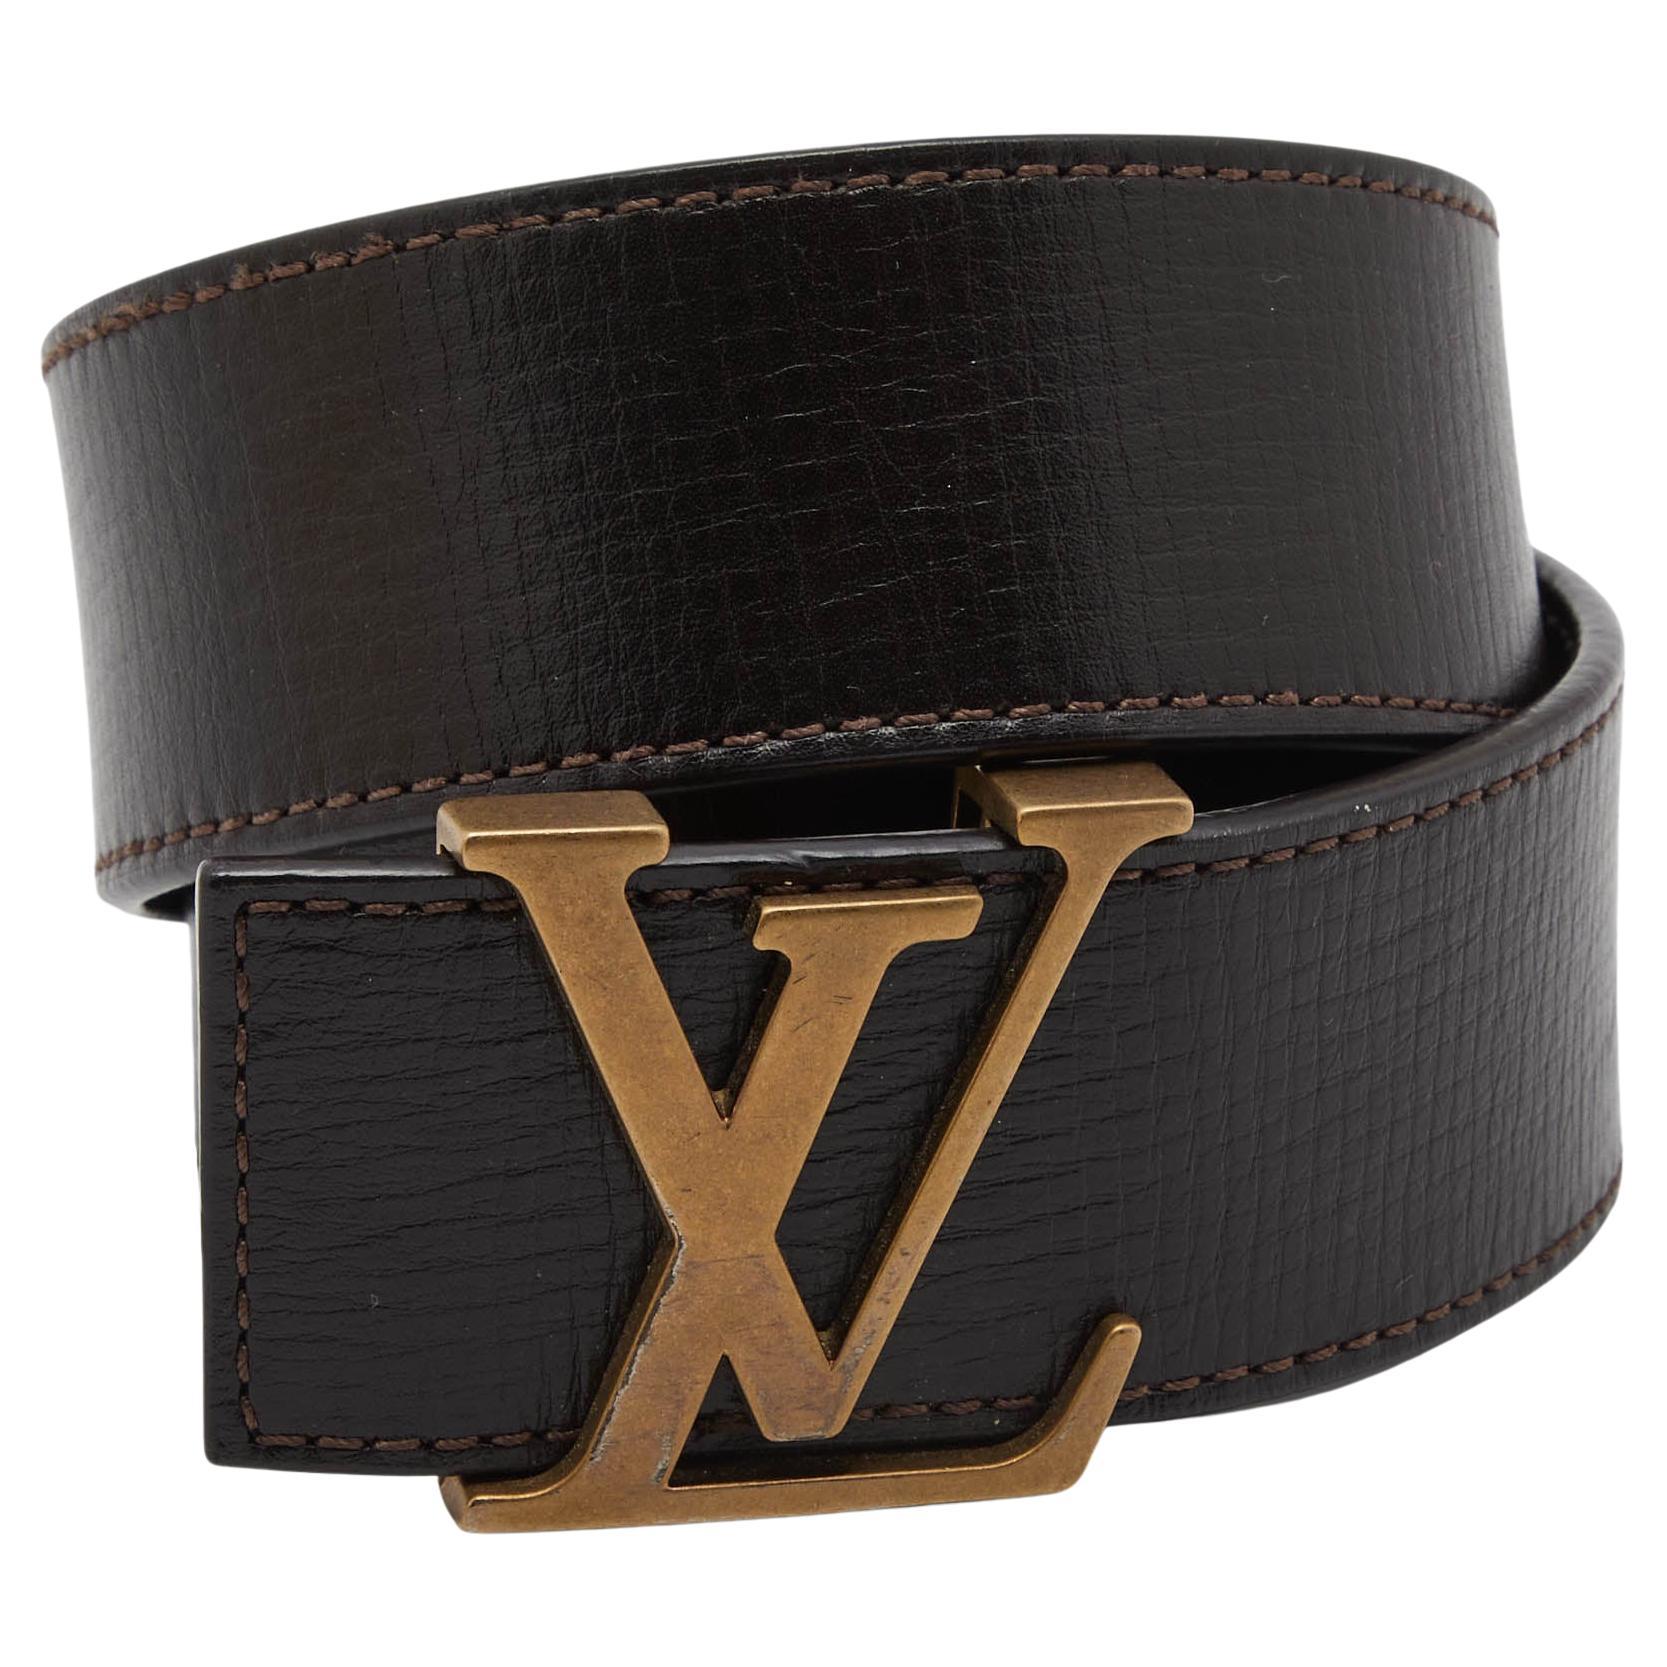 Initiales leather belt Louis Vuitton Brown size 85 cm in Leather - 34840310